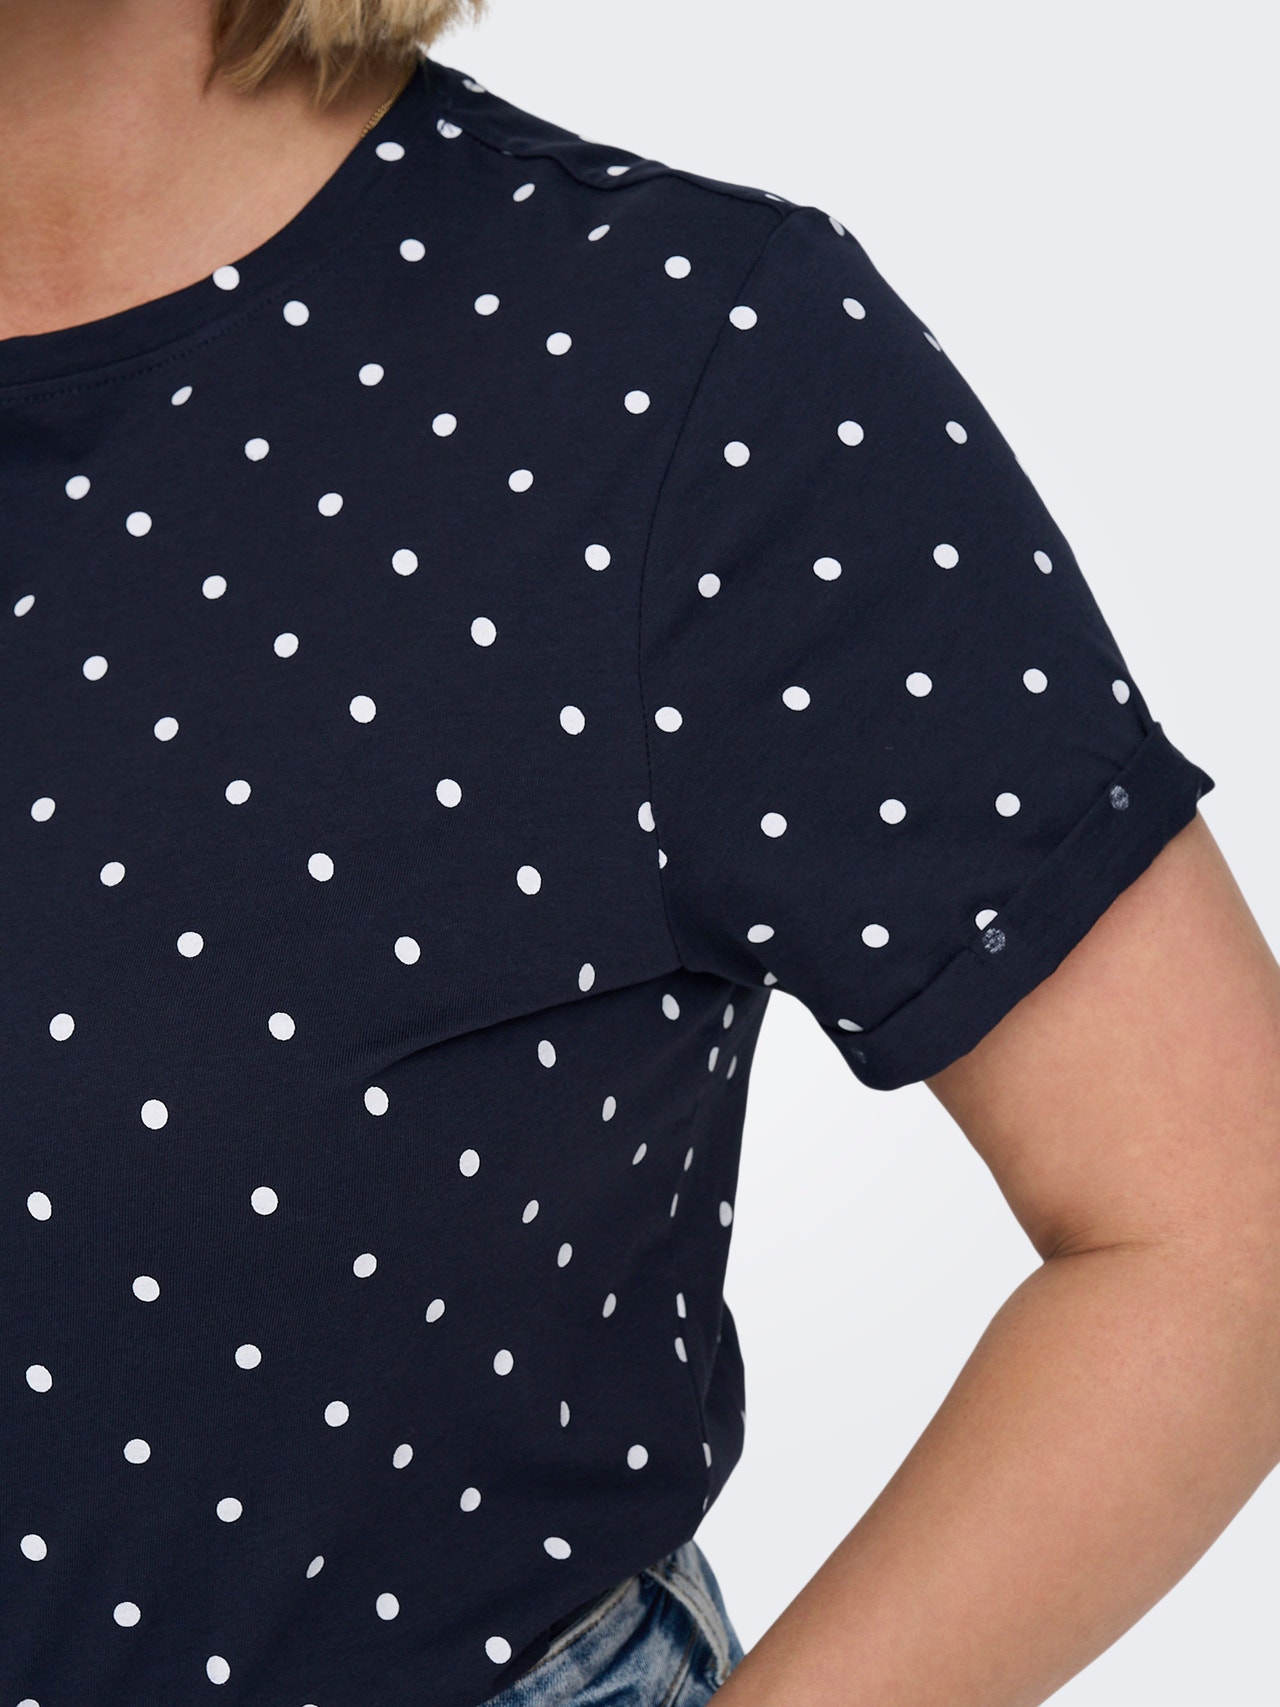 ONLY Curvy dotted t-shirt -Night Sky - 15290406